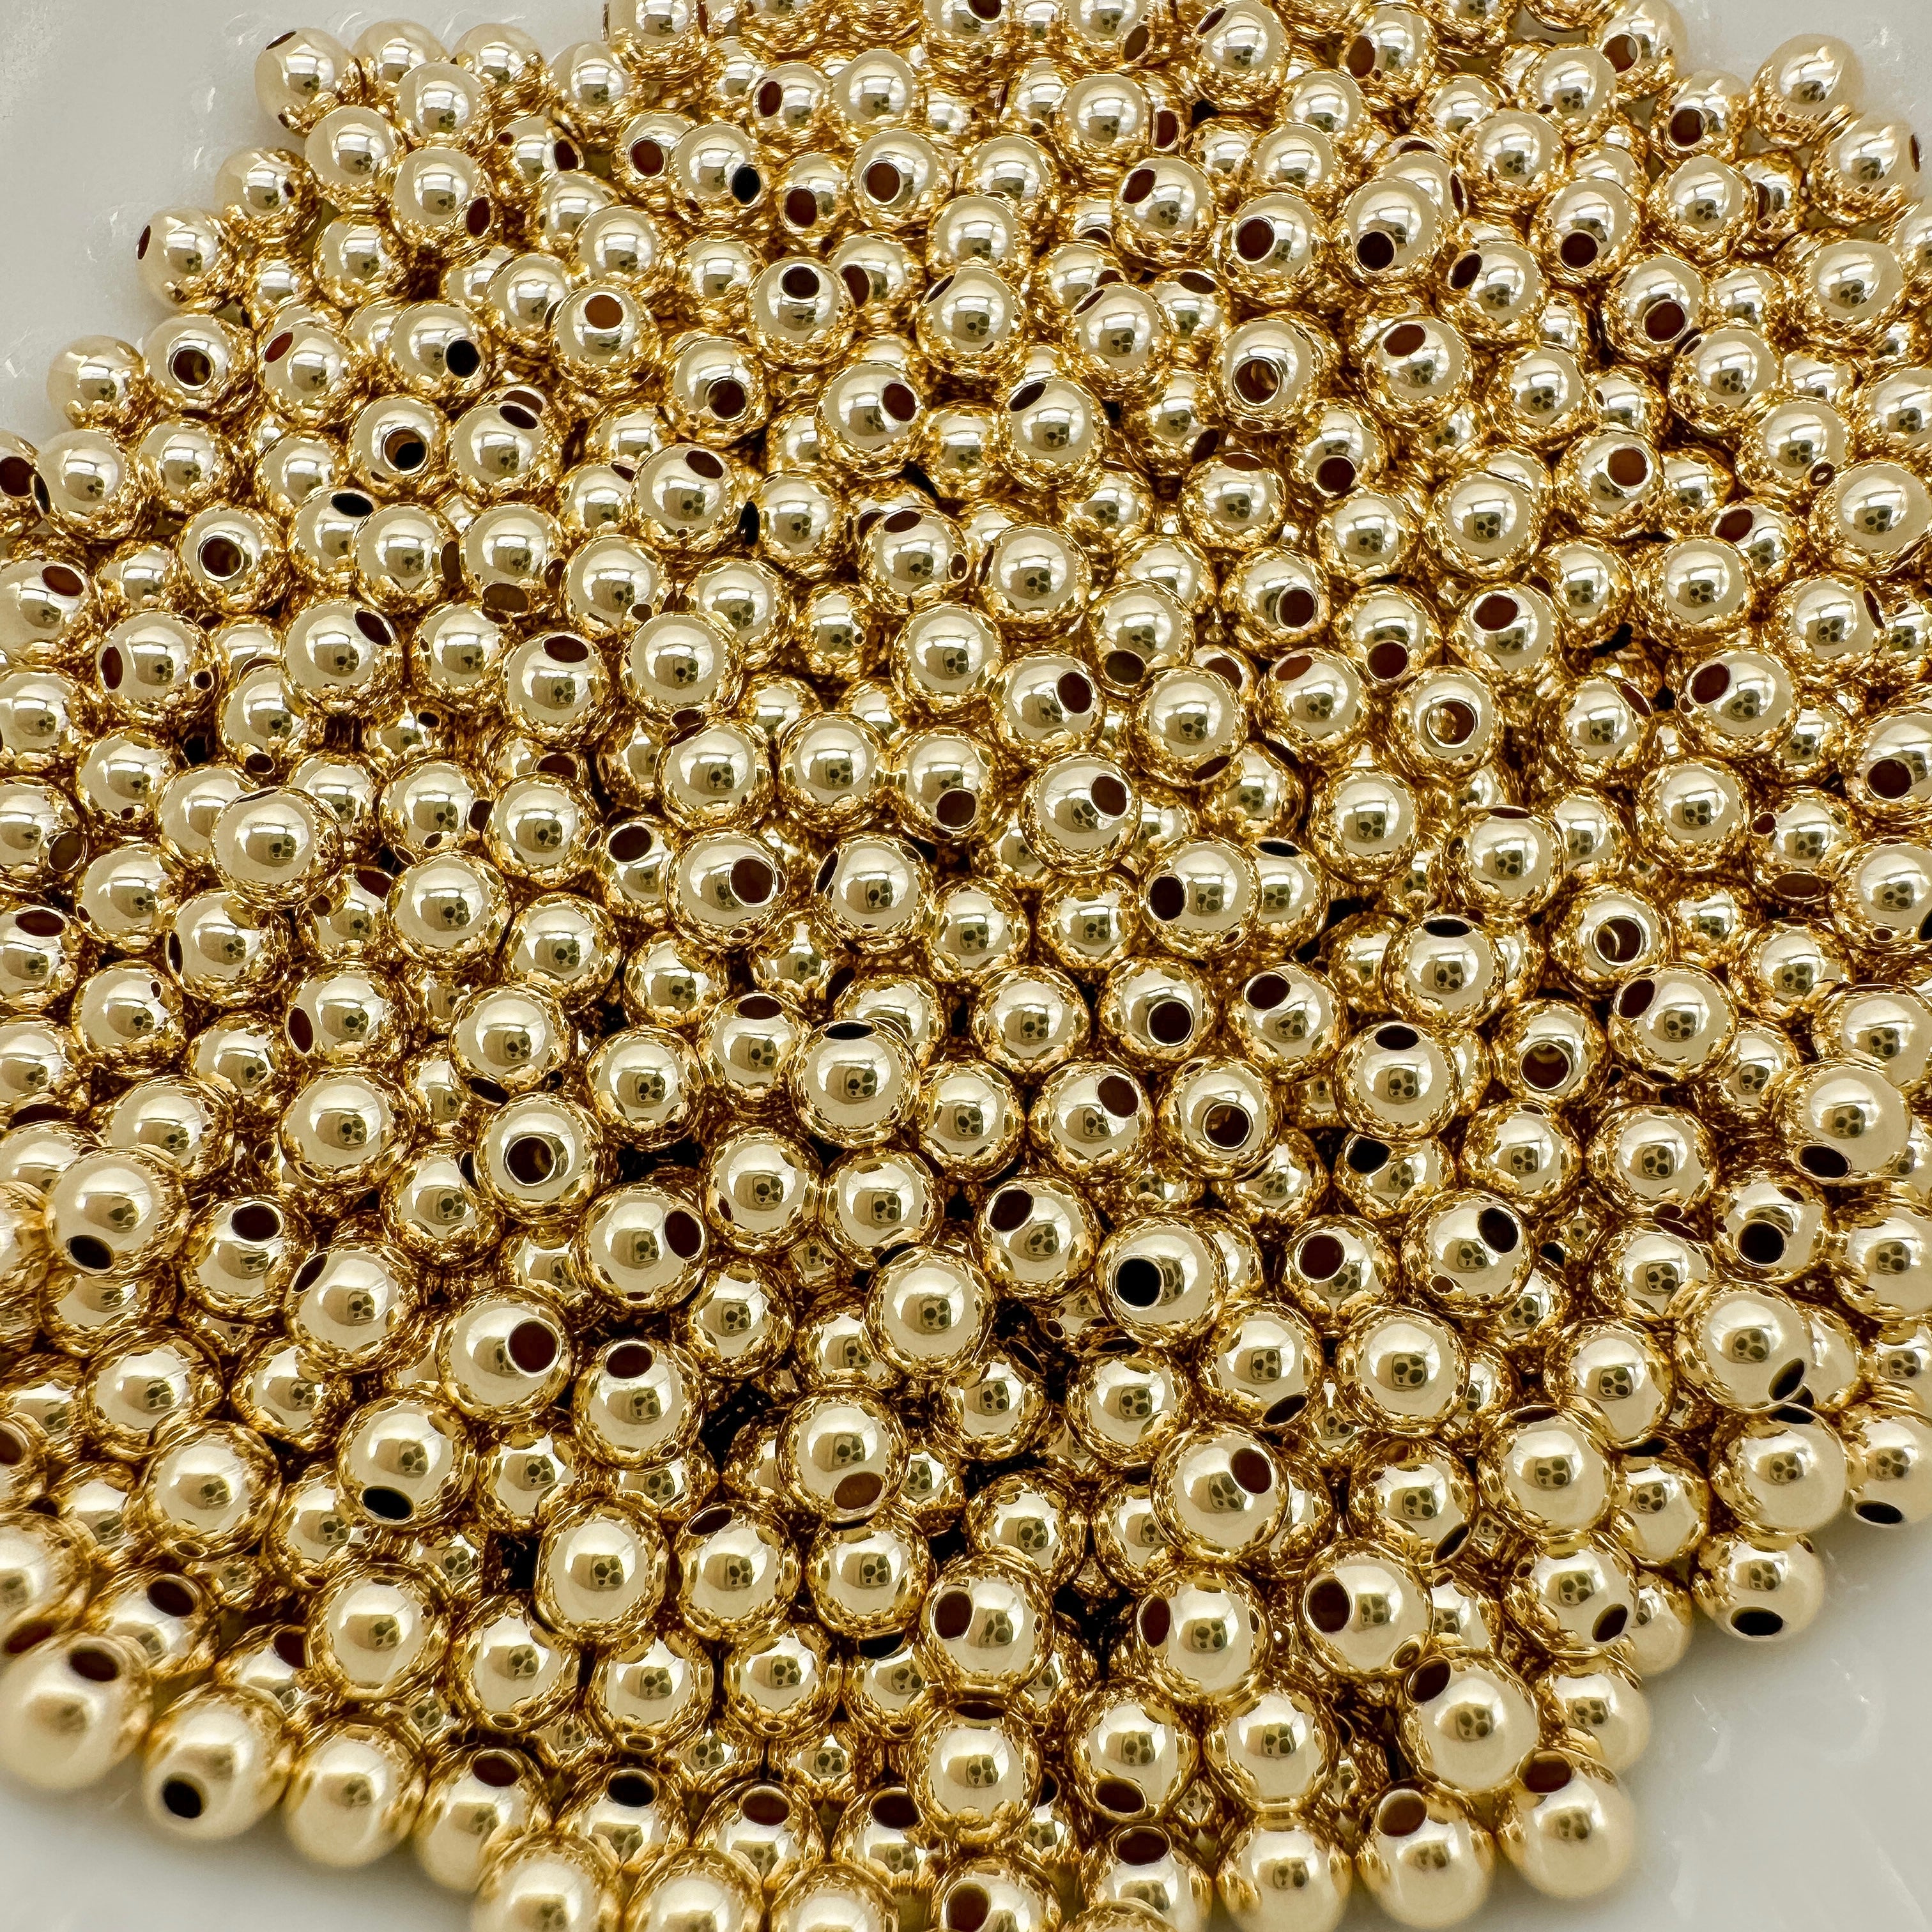 3mm round gold filled beads / wholesale gold filled beads / round gold filled beads